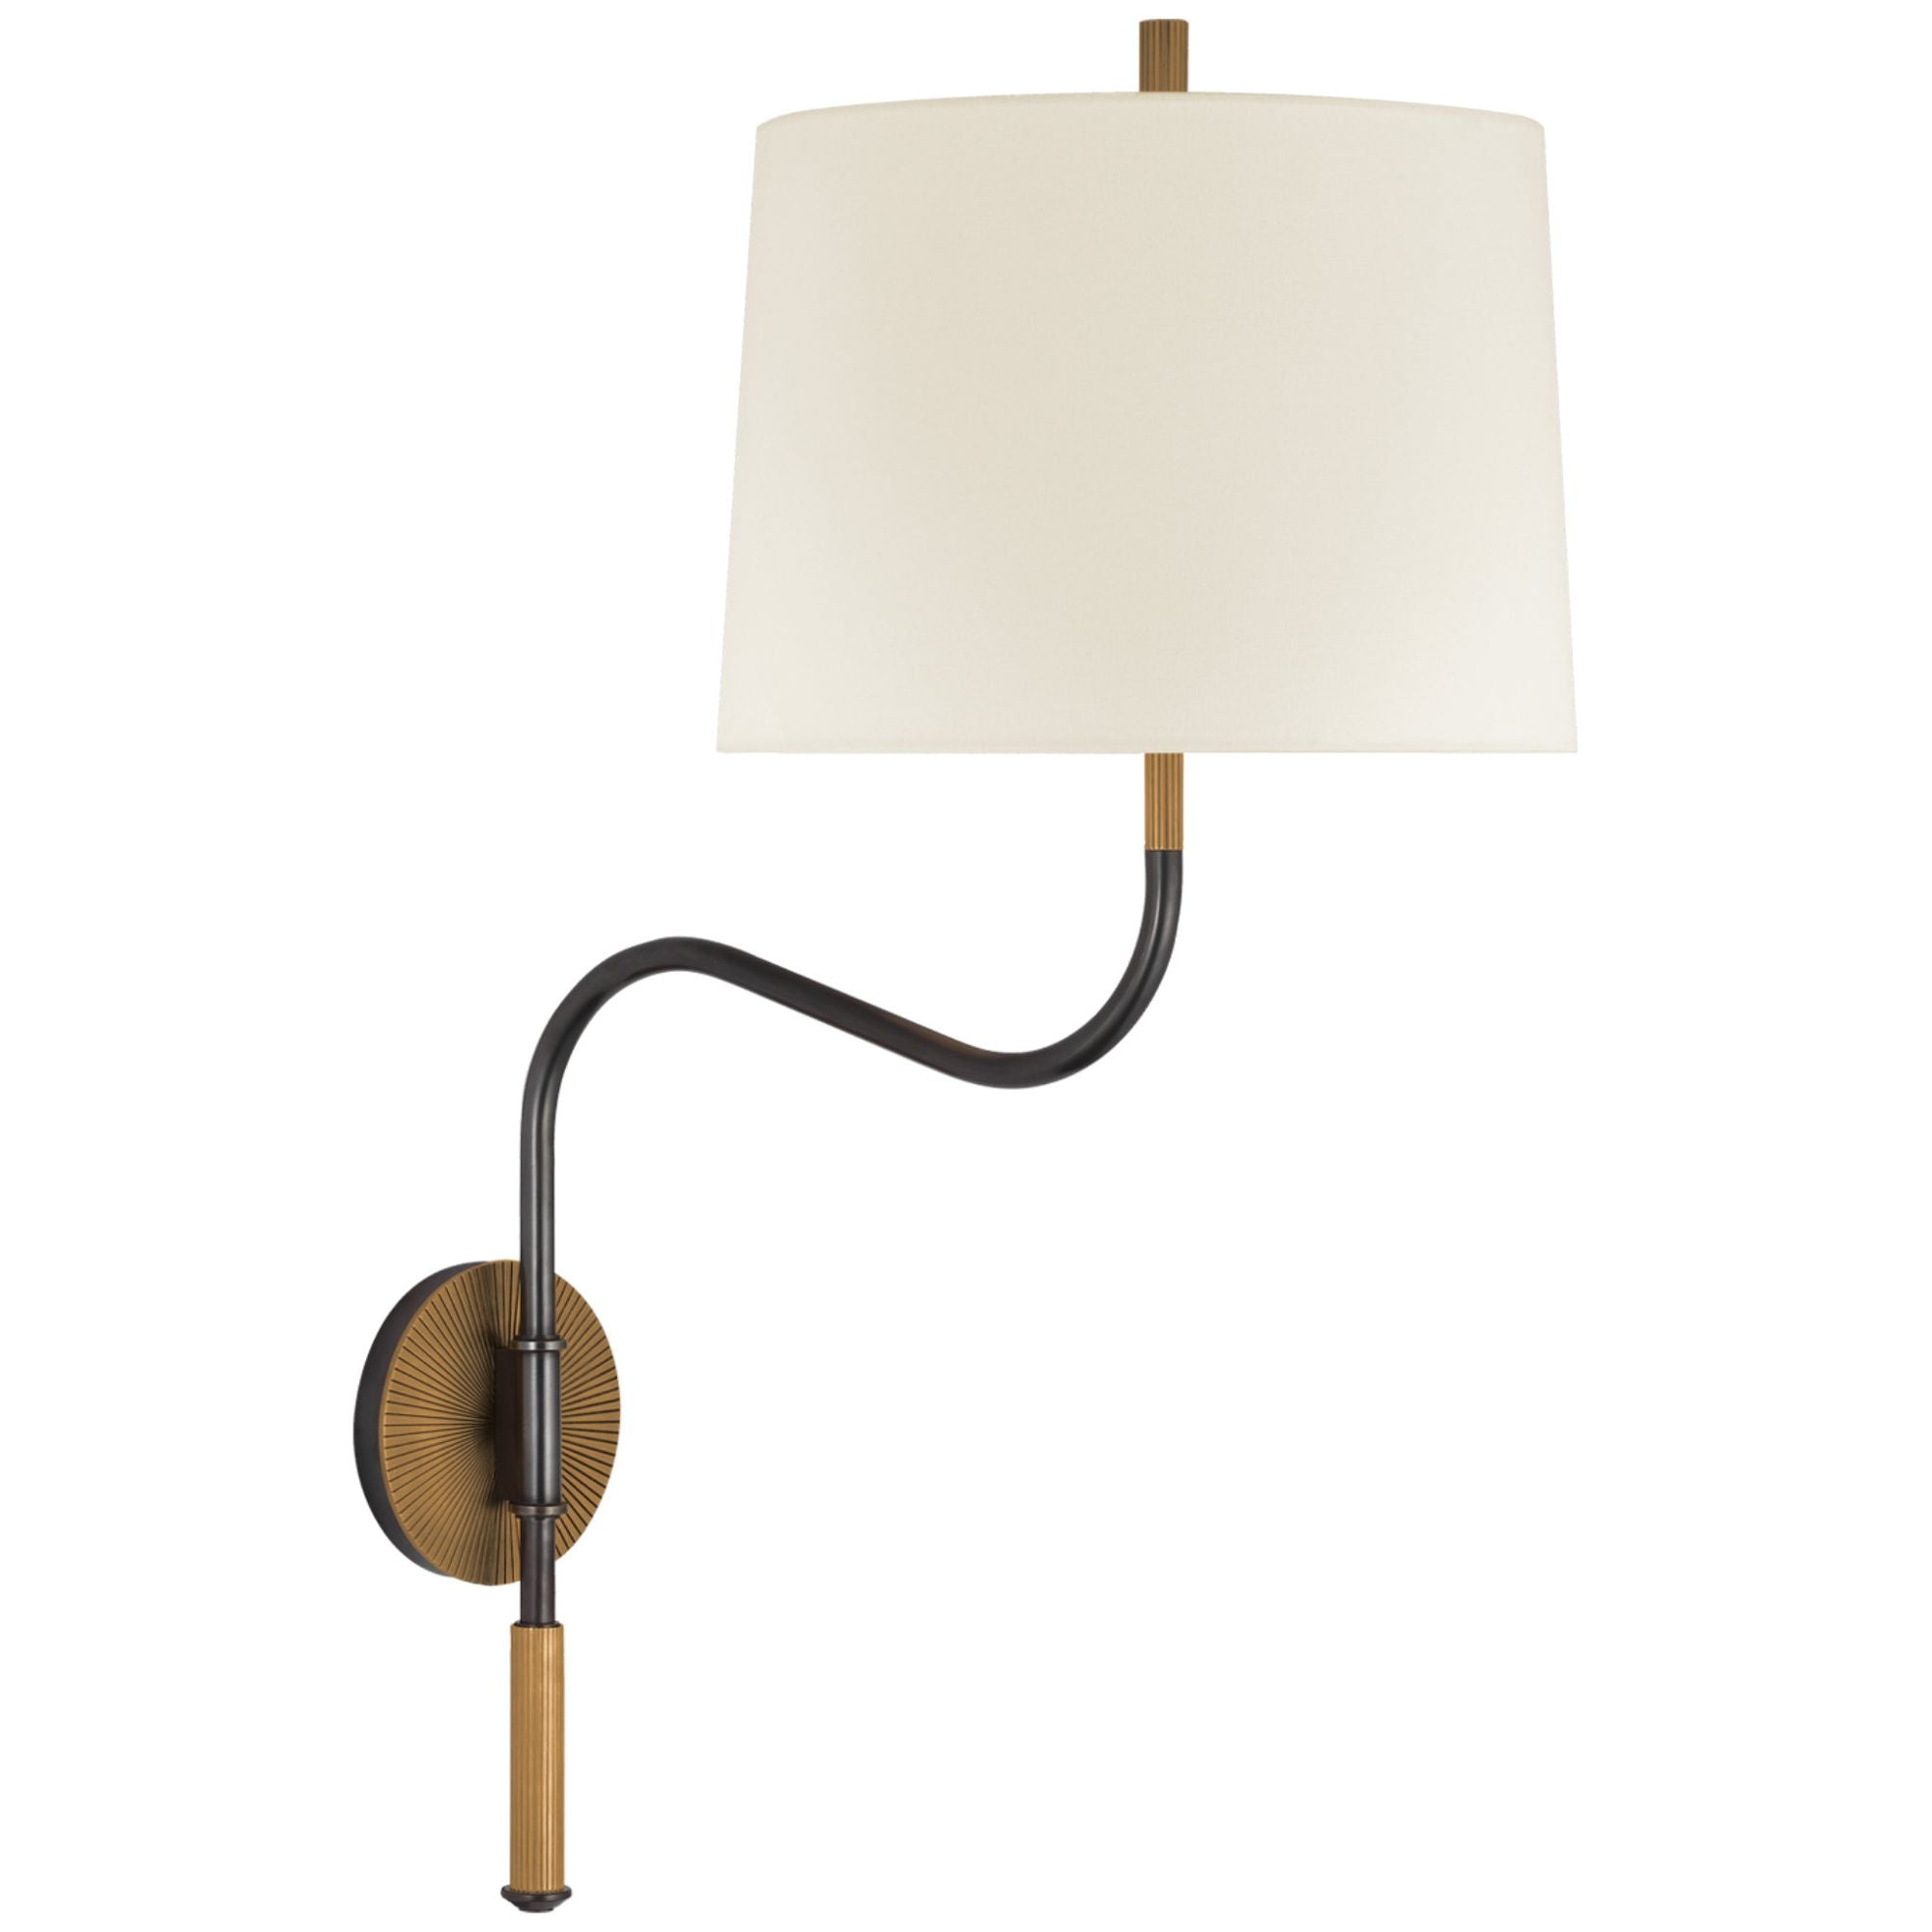 Thomas O'Brien Canto Medium Swinging Wall Light in Bronze and Brass with Linen Shade